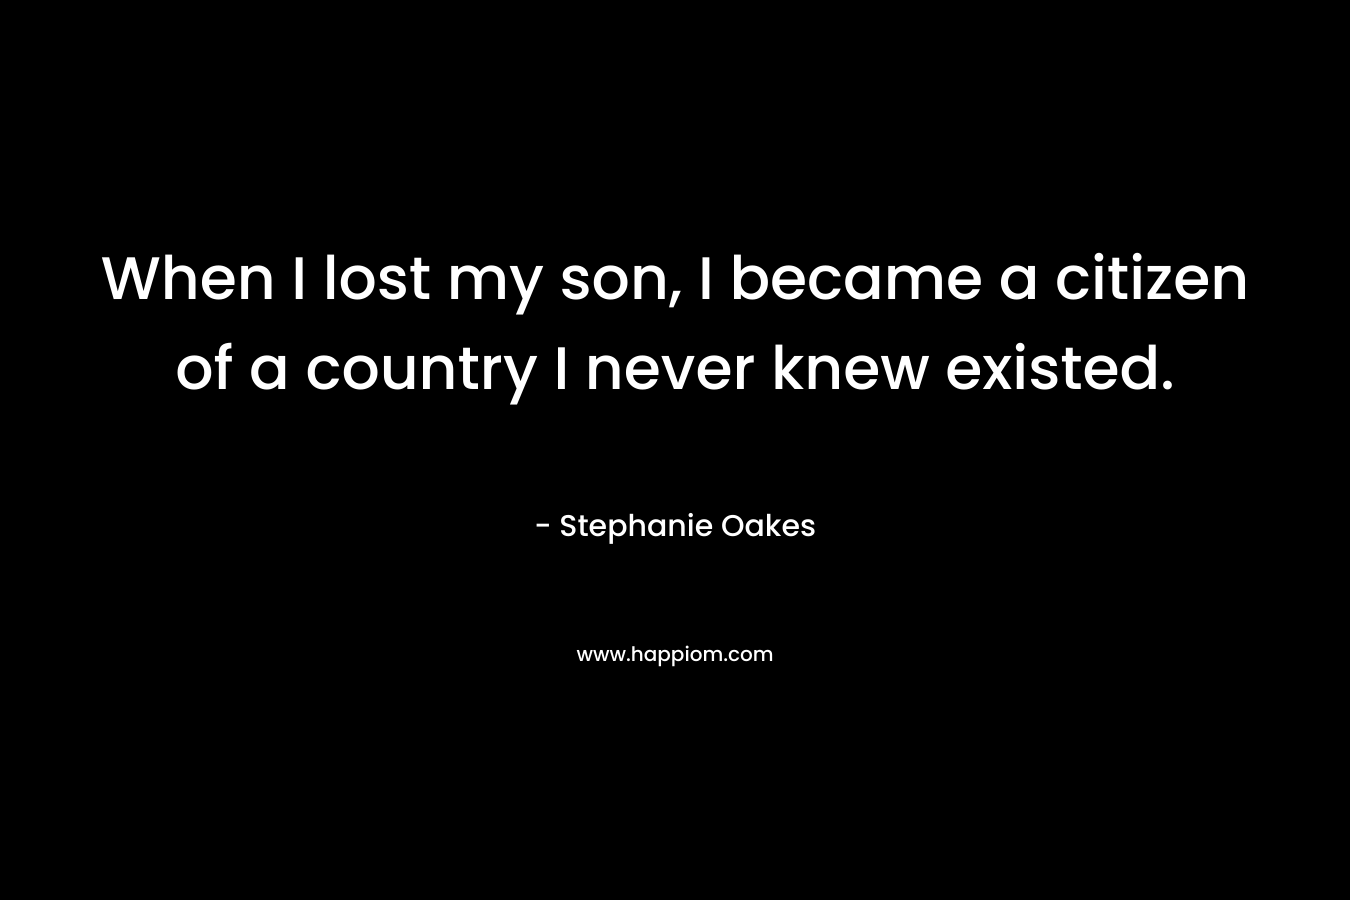 When I lost my son, I became a citizen of a country I never knew existed. – Stephanie Oakes